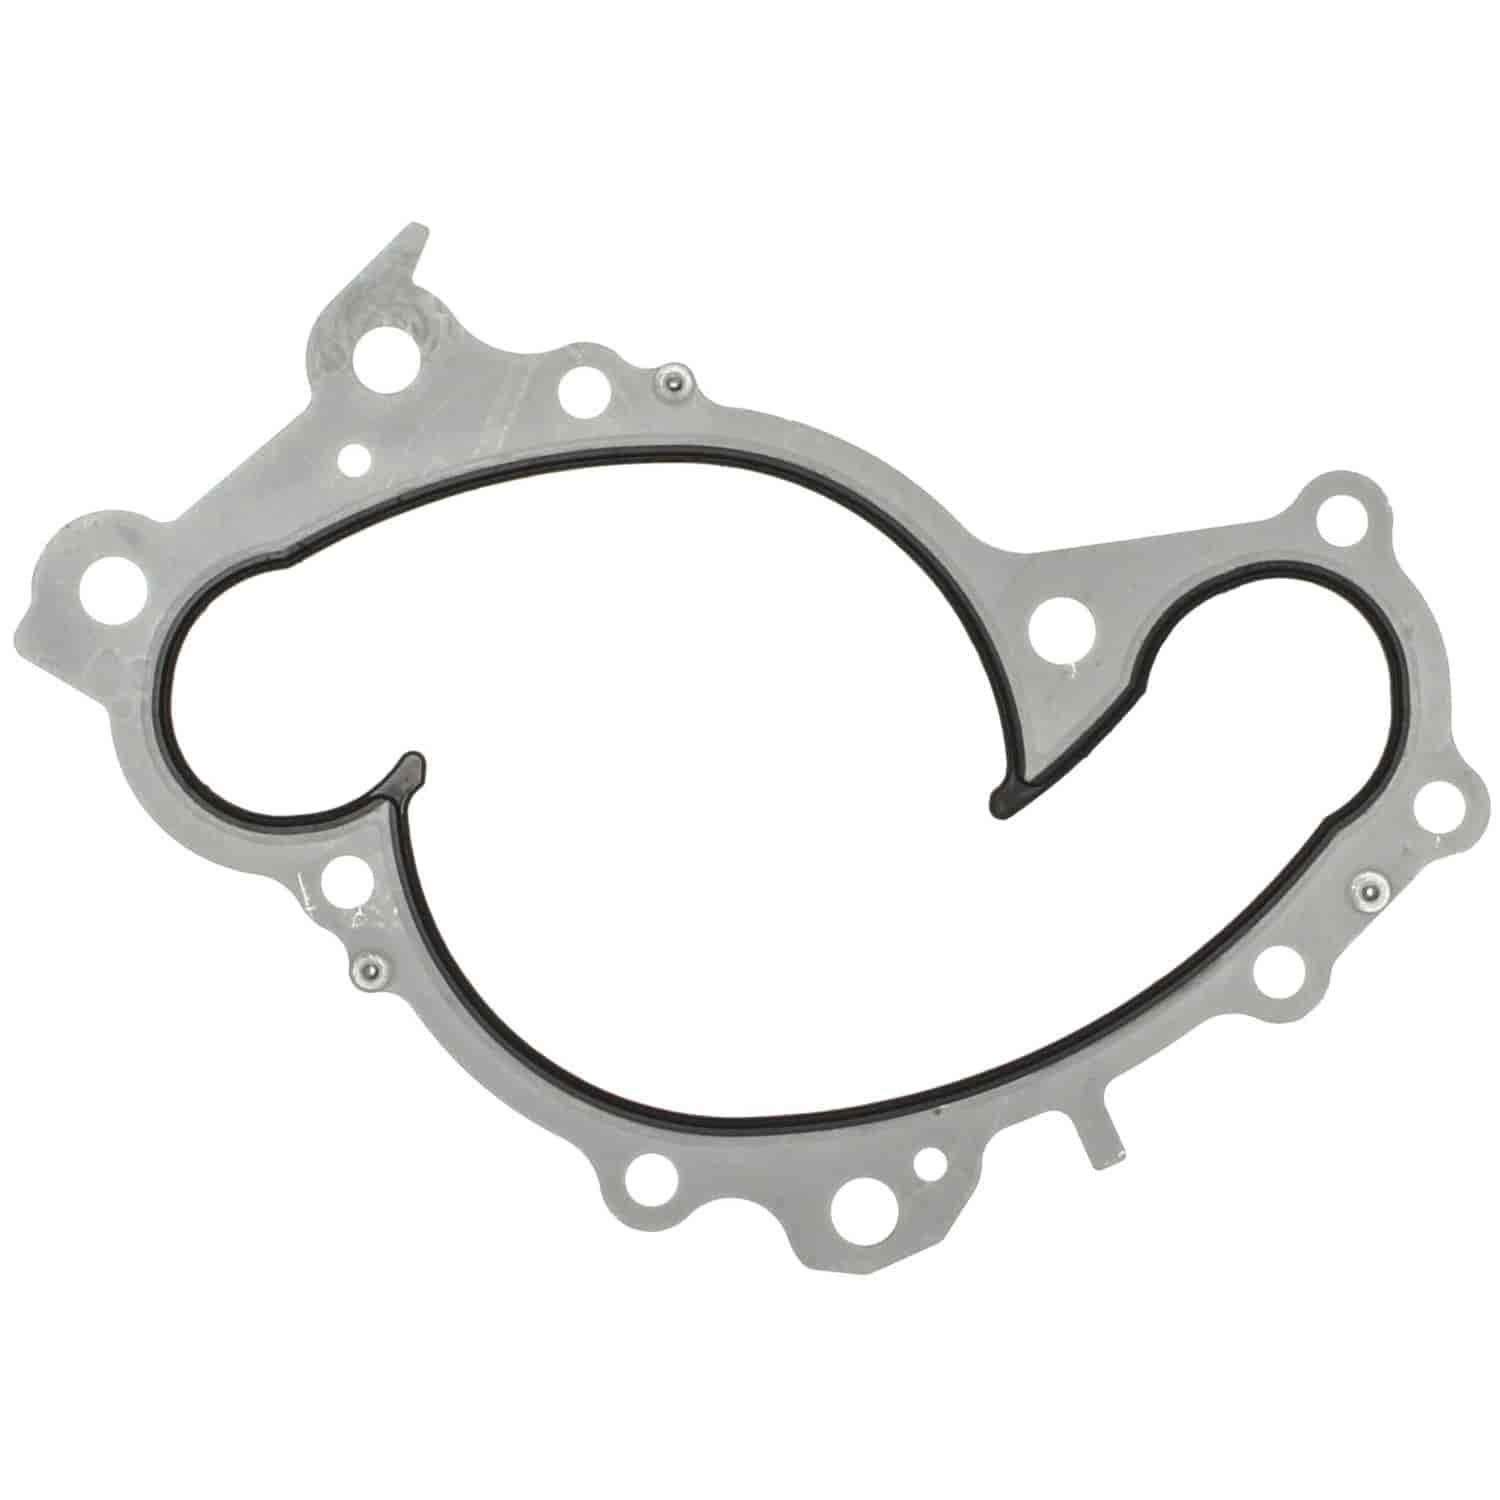 Water Pump Gasket Toyota 1MZFE 3.0L V6 Camry